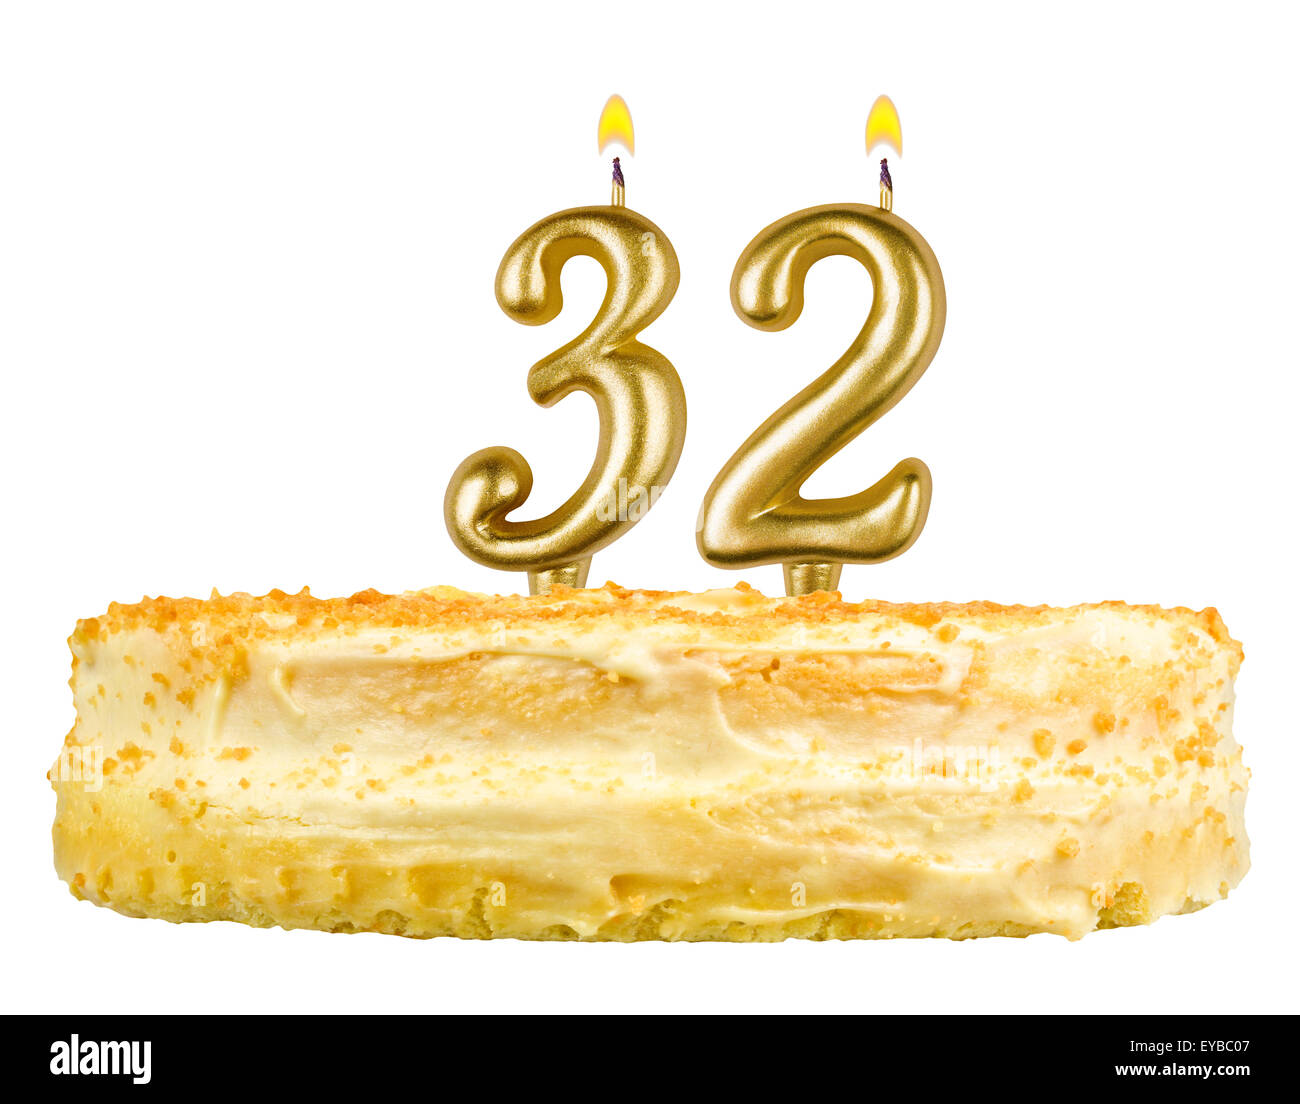 birthday cake with candles number thirty two isolated on white background Stock Photo